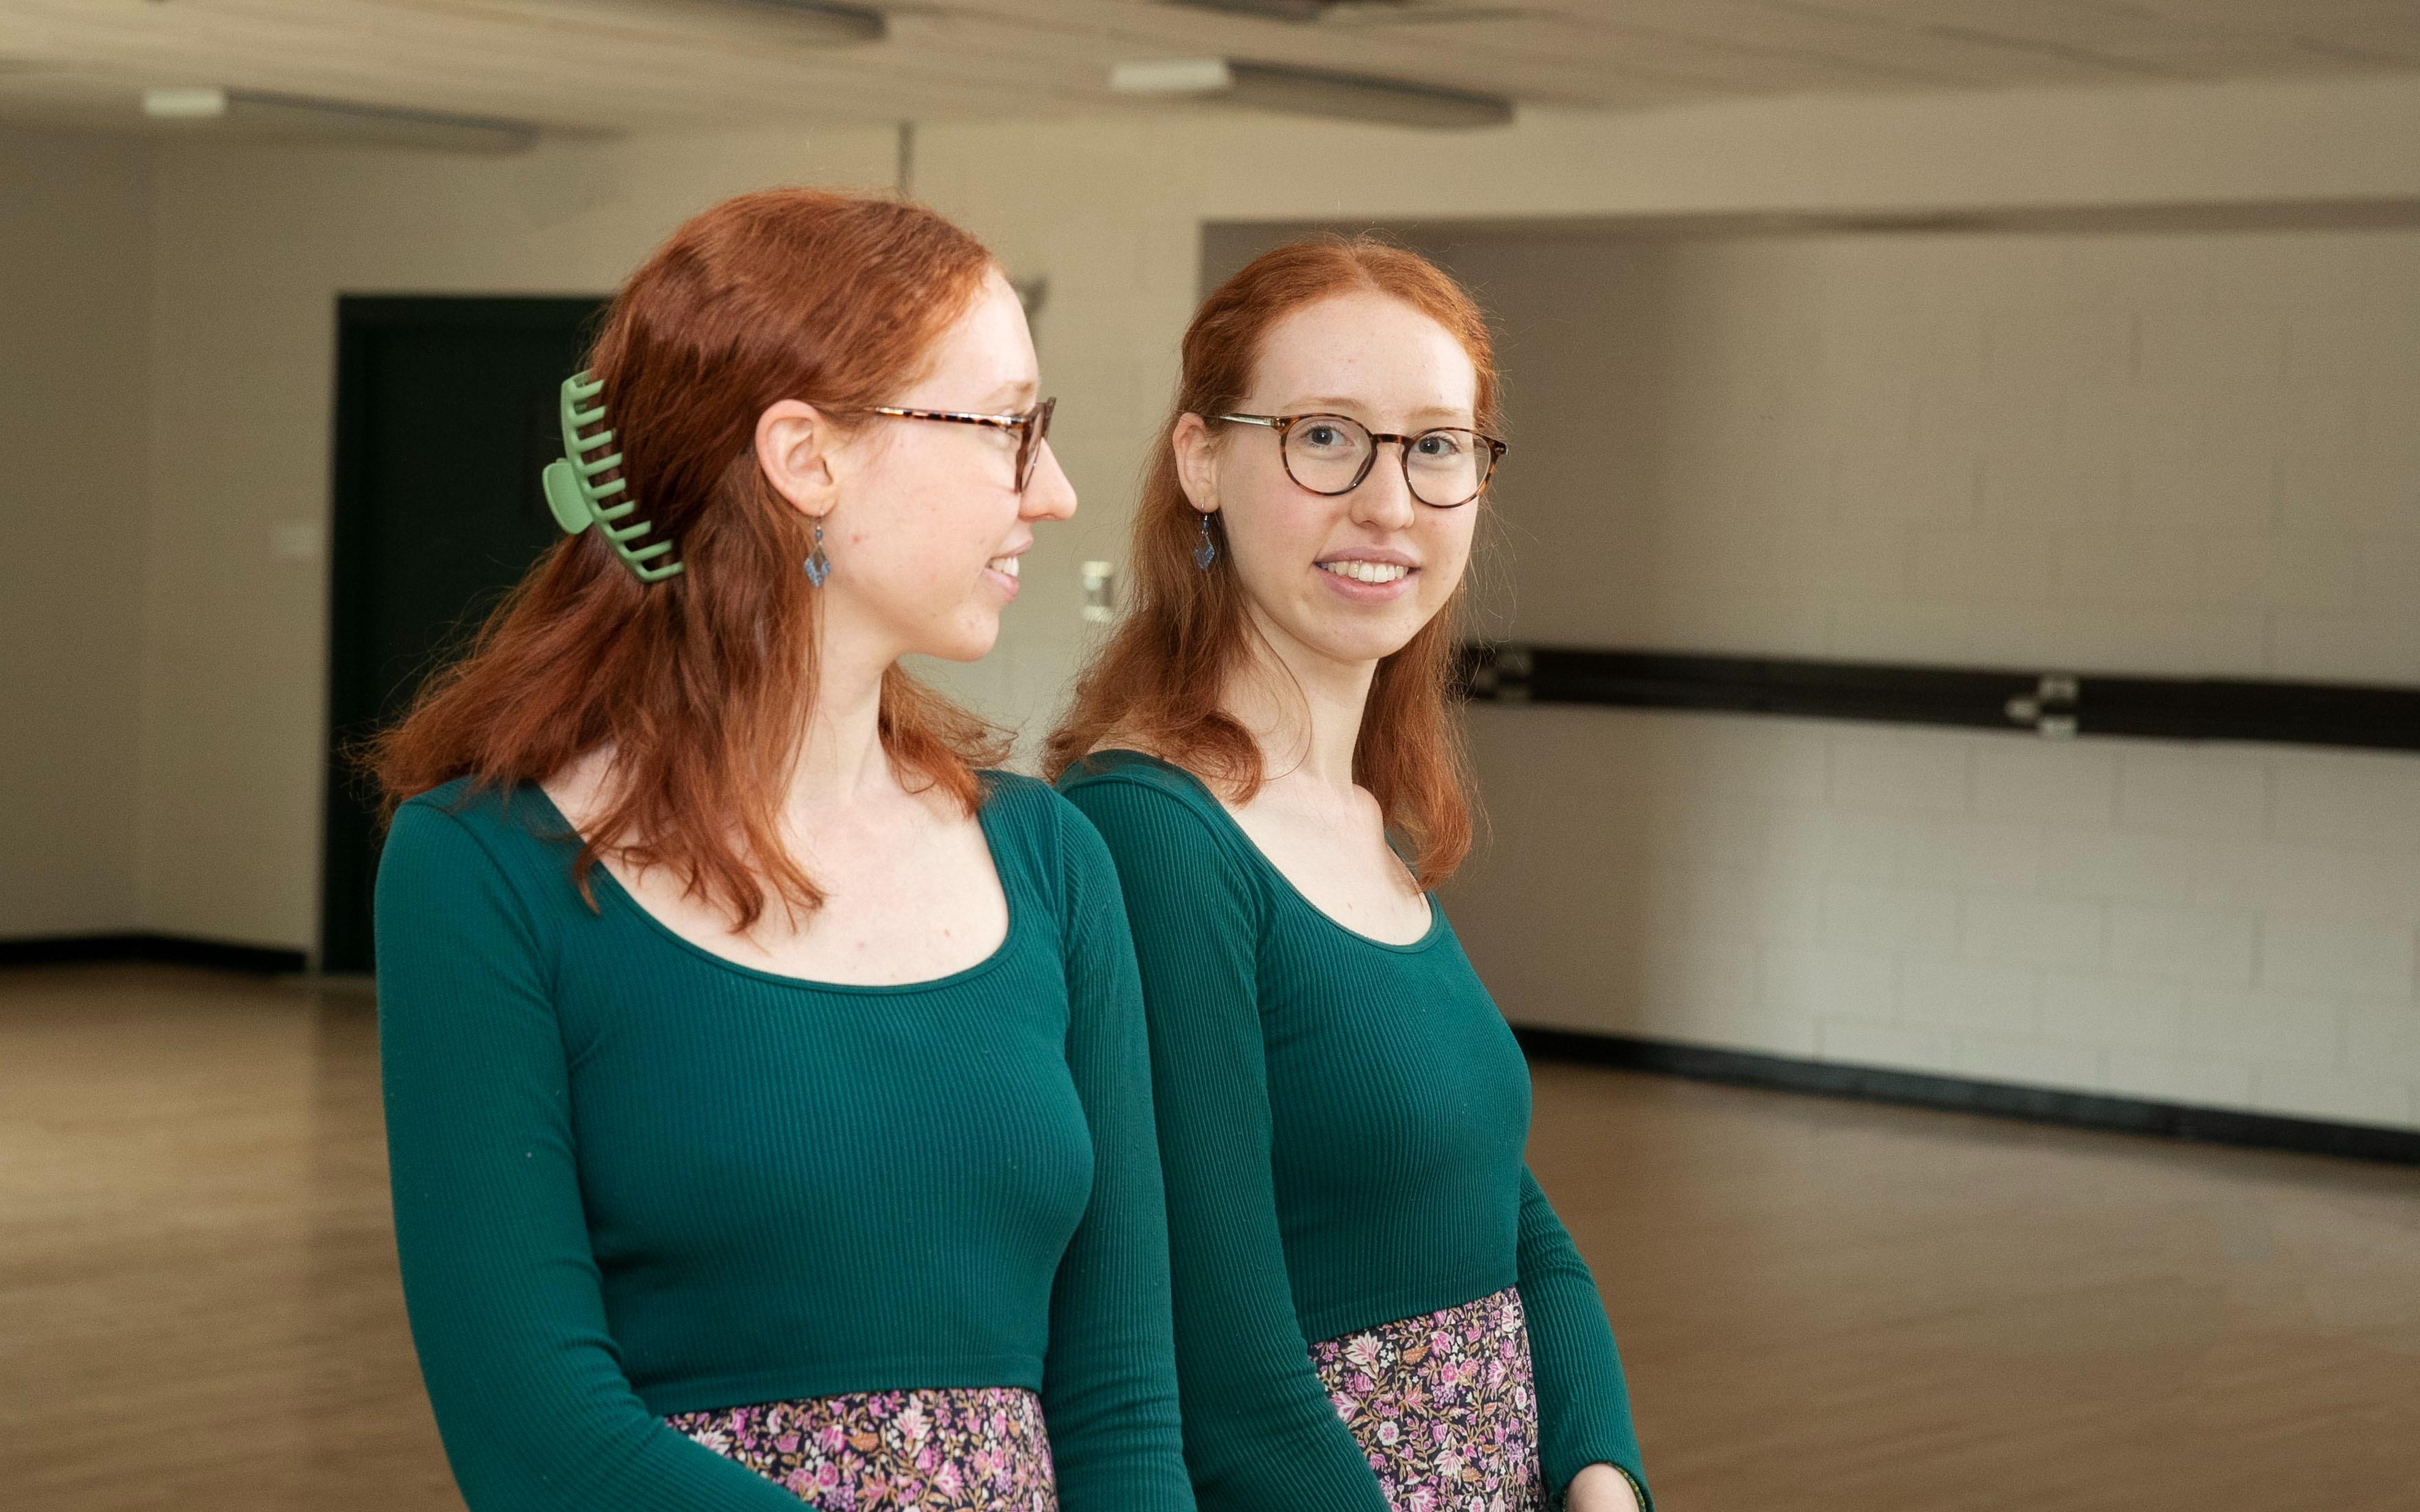 Liz Bracht '24 smiles into a mirror in a dance studio. She is wearing a blue, long sleeved top and a floral skirt.